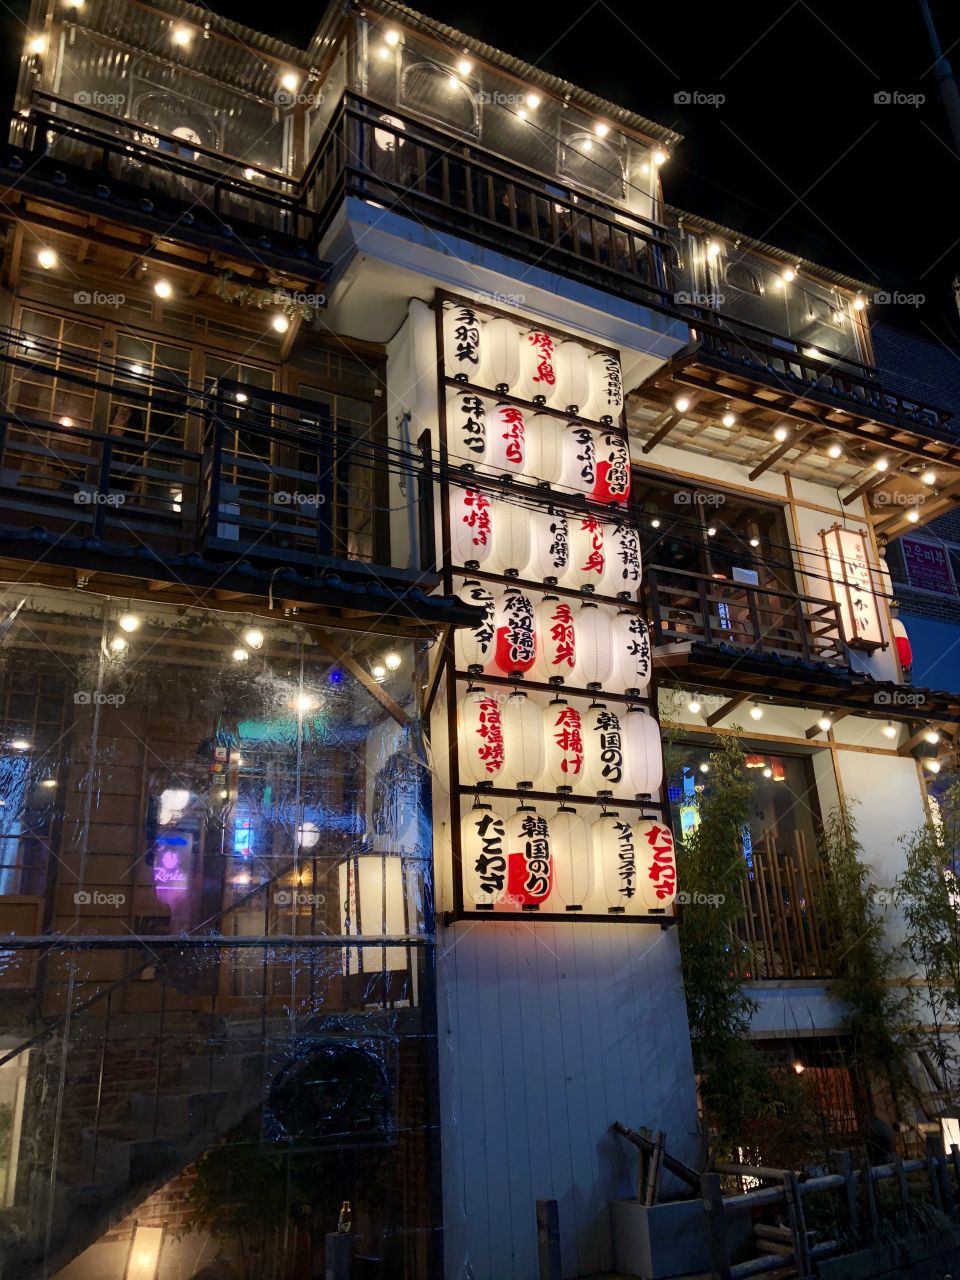 A traditional, Japanese Izakaya smacked in the middle of bustling Seoul. Delicious food, drink, wine and beer all await you in this wooden fortress. The old meets the new in every part of this city. 